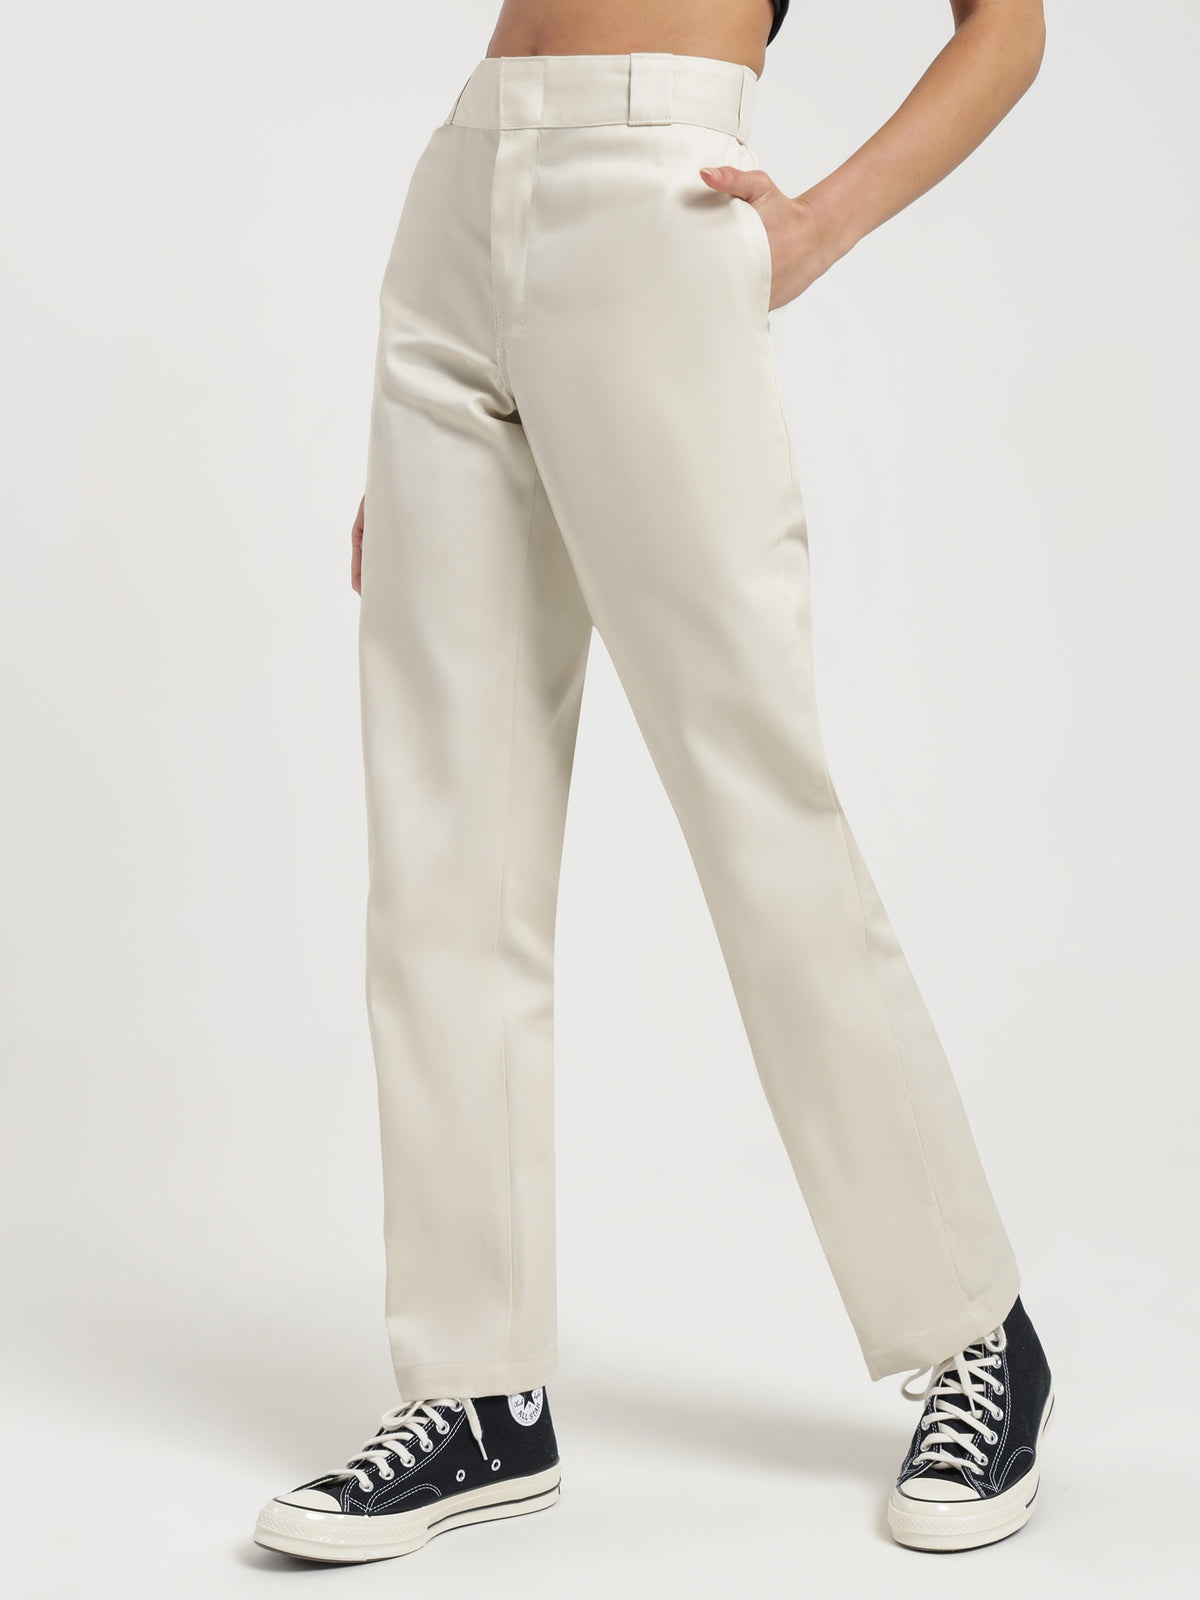 875 Tapered Fit Pants in Bone